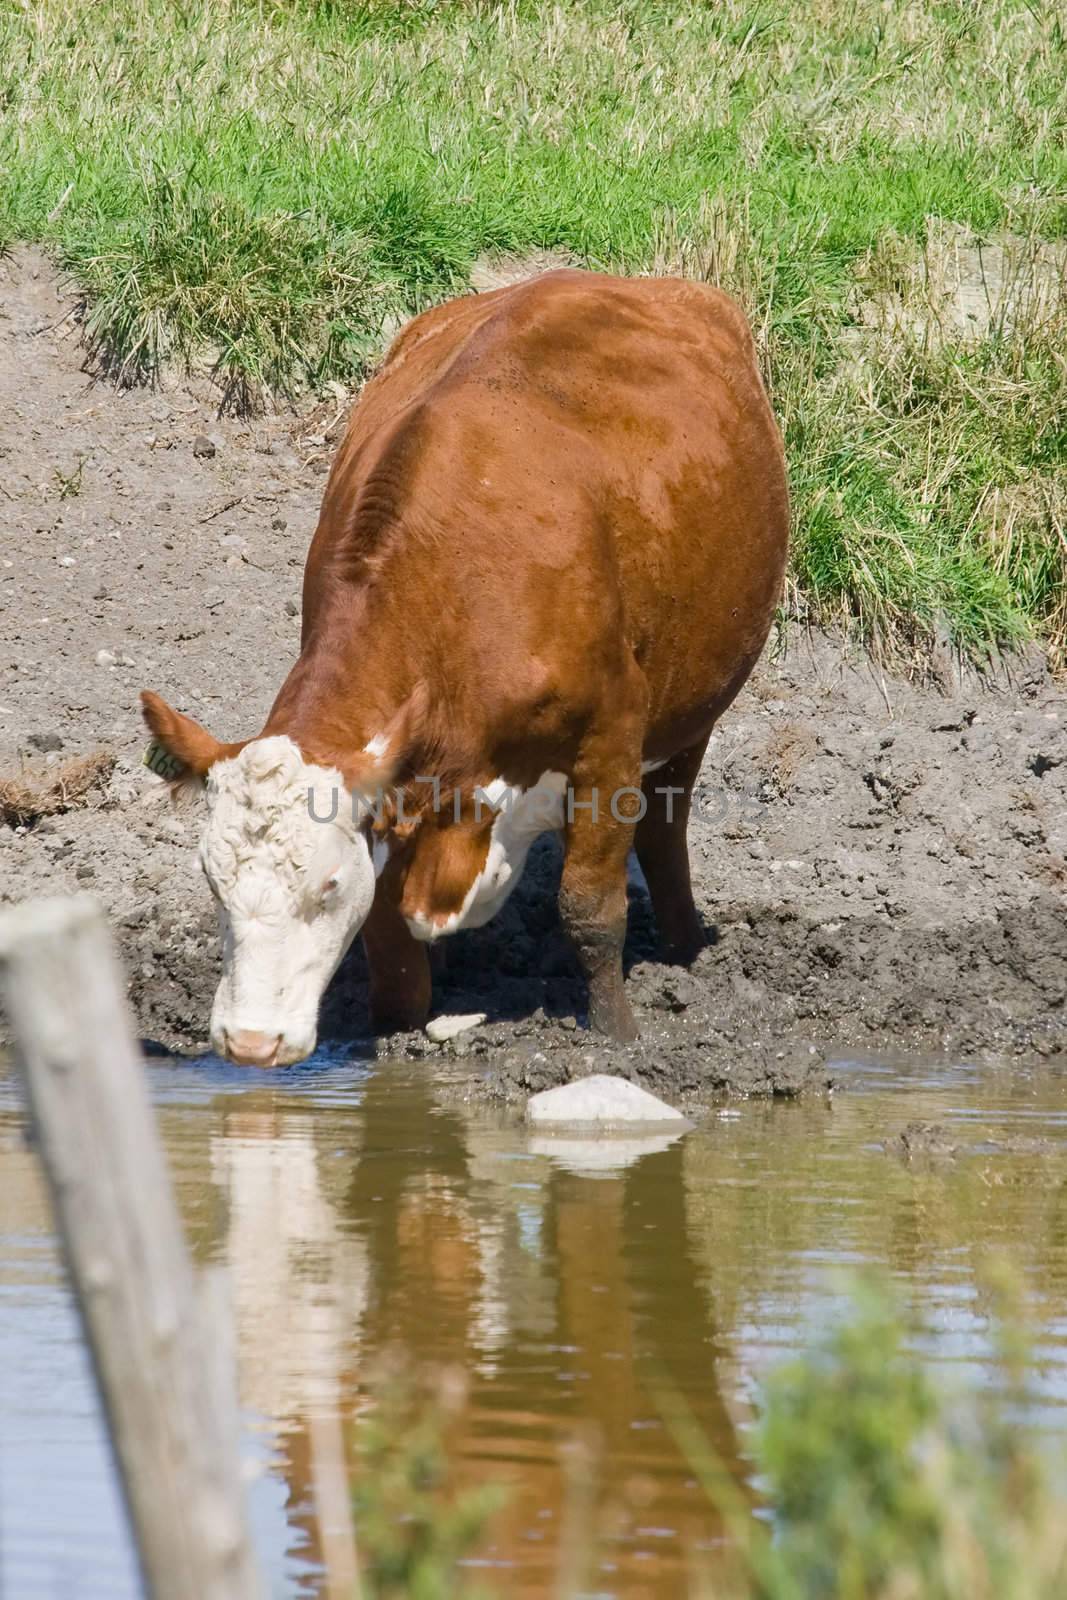 Thirsty Cow reflecting in pond by woodygraphs